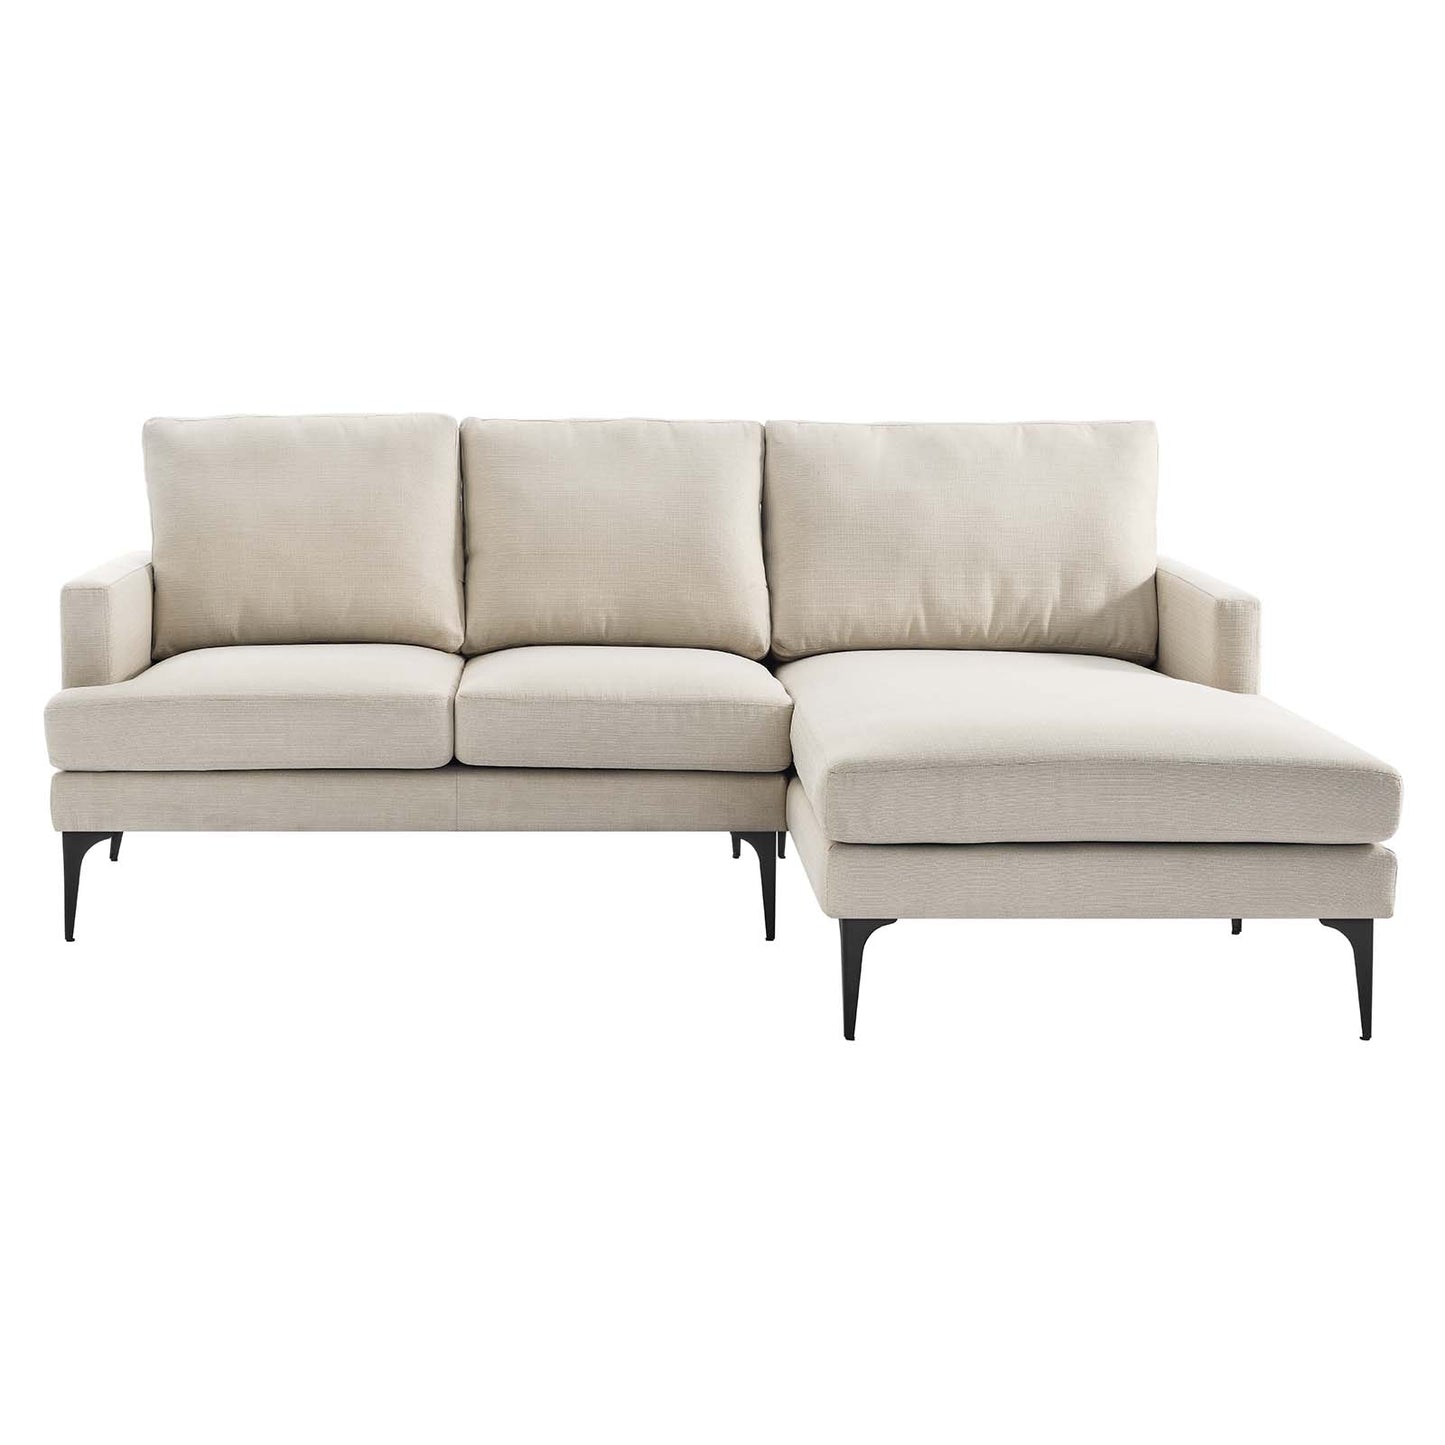 Evermore Right-Facing Upholstered Fabric Sectional Sofa Beige EEI-6012-BEI